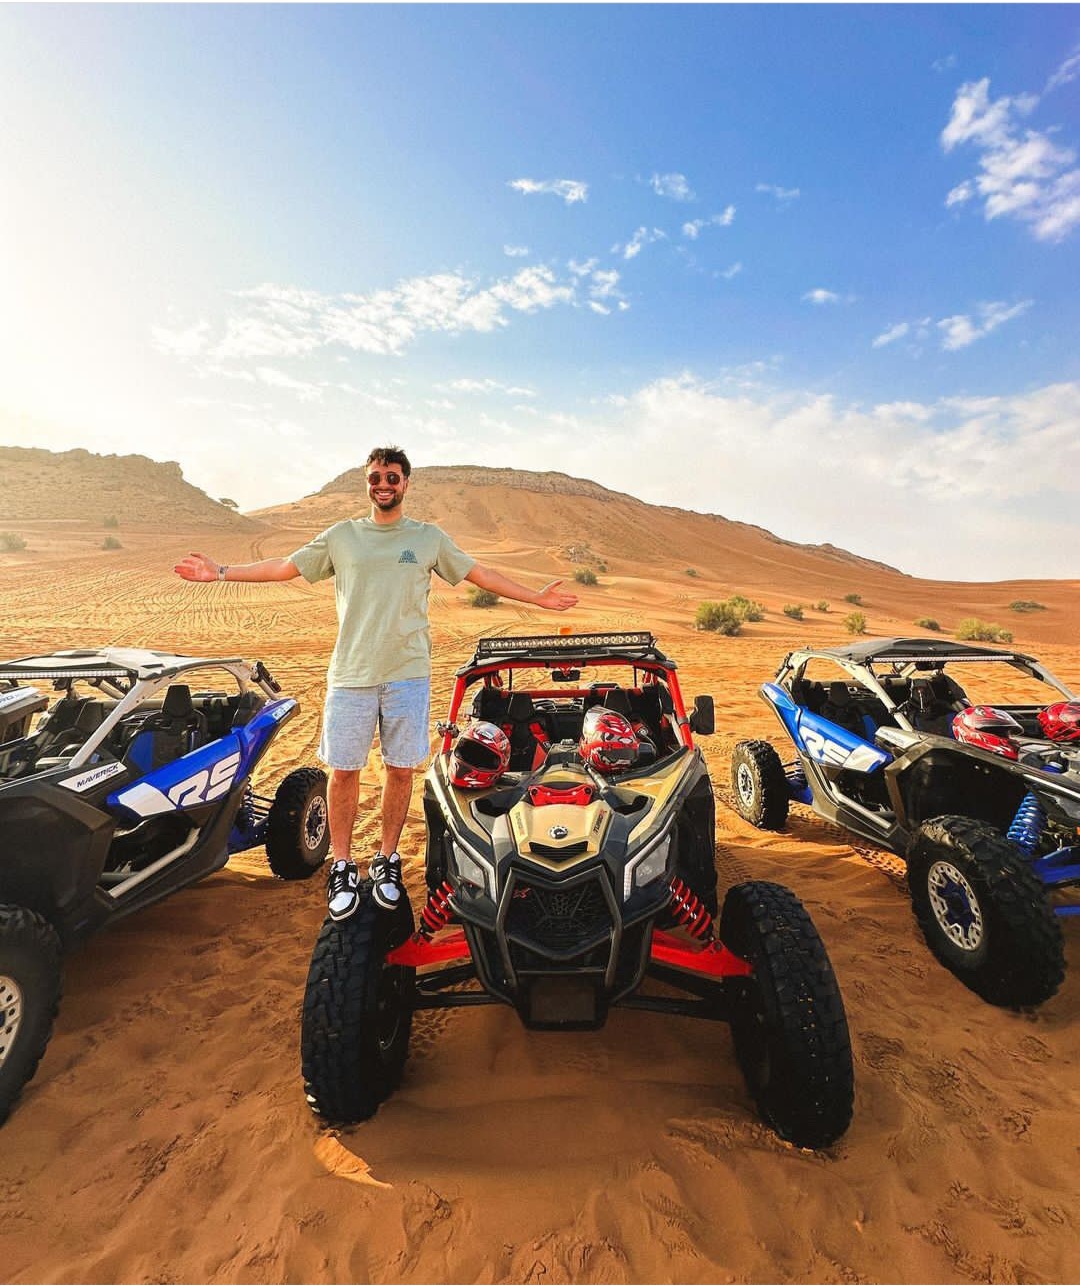 “Slicing Through the Sands: The Thrill of Buggy Rides in Dubai”